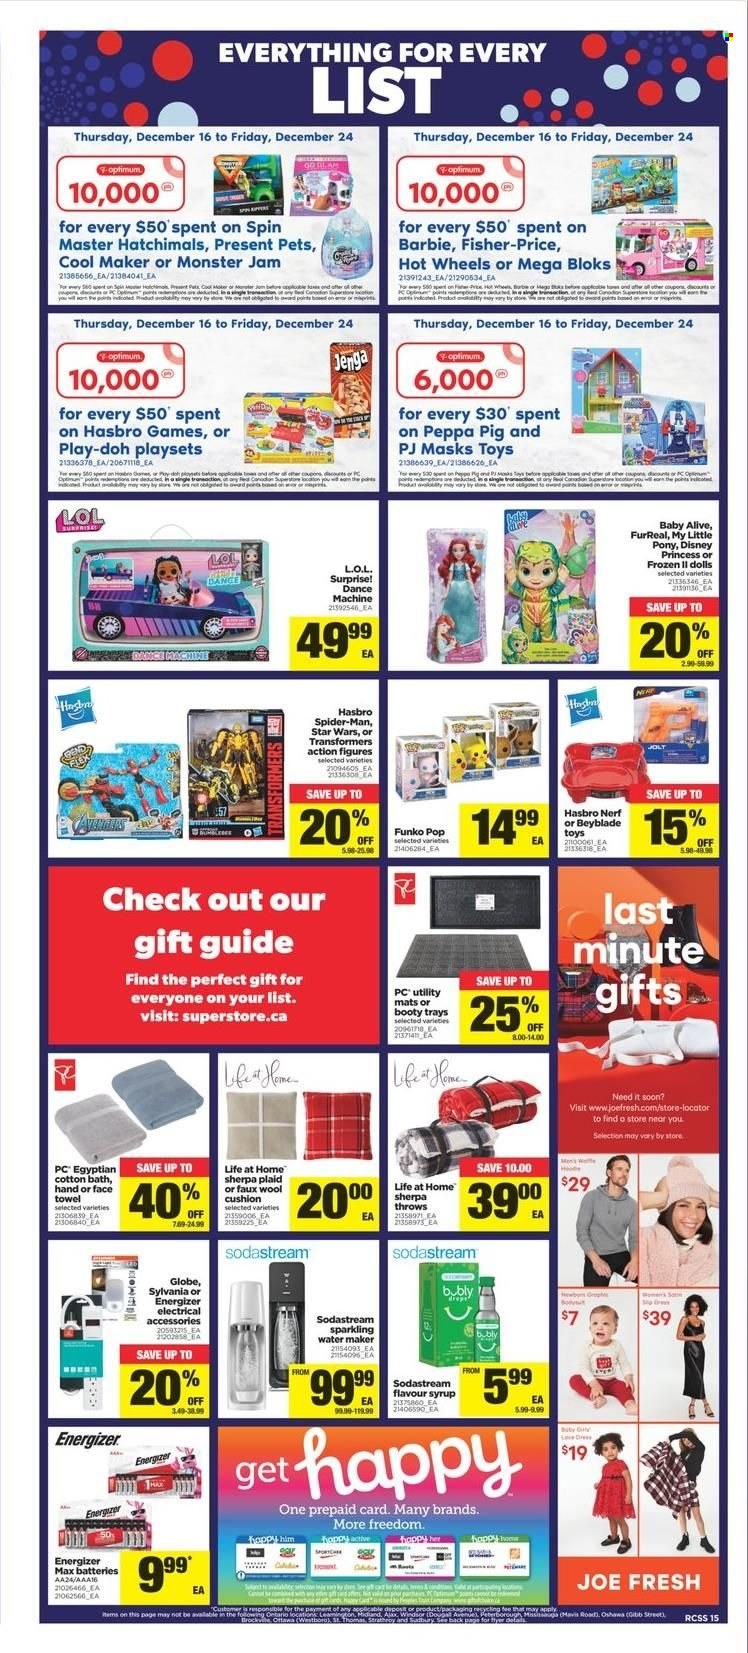 thumbnail - Real Canadian Superstore Flyer - December 16, 2021 - December 24, 2021 - Sales products - Disney, syrup, Monster, Hot Wheels, Avengers, Peppa Pig, Barbie, SodaStream, battery, Sylvania, cushion, towel, Optimum, TV, water maker, doll, FurReal, Mega Bloks, My Little Pony, play set, Hasbro, toys, Fisher-Price, princess, BeyBlade, L.O.L. Surprise, Energizer, Nerf, Play-doh, Hatchimals. Page 15.